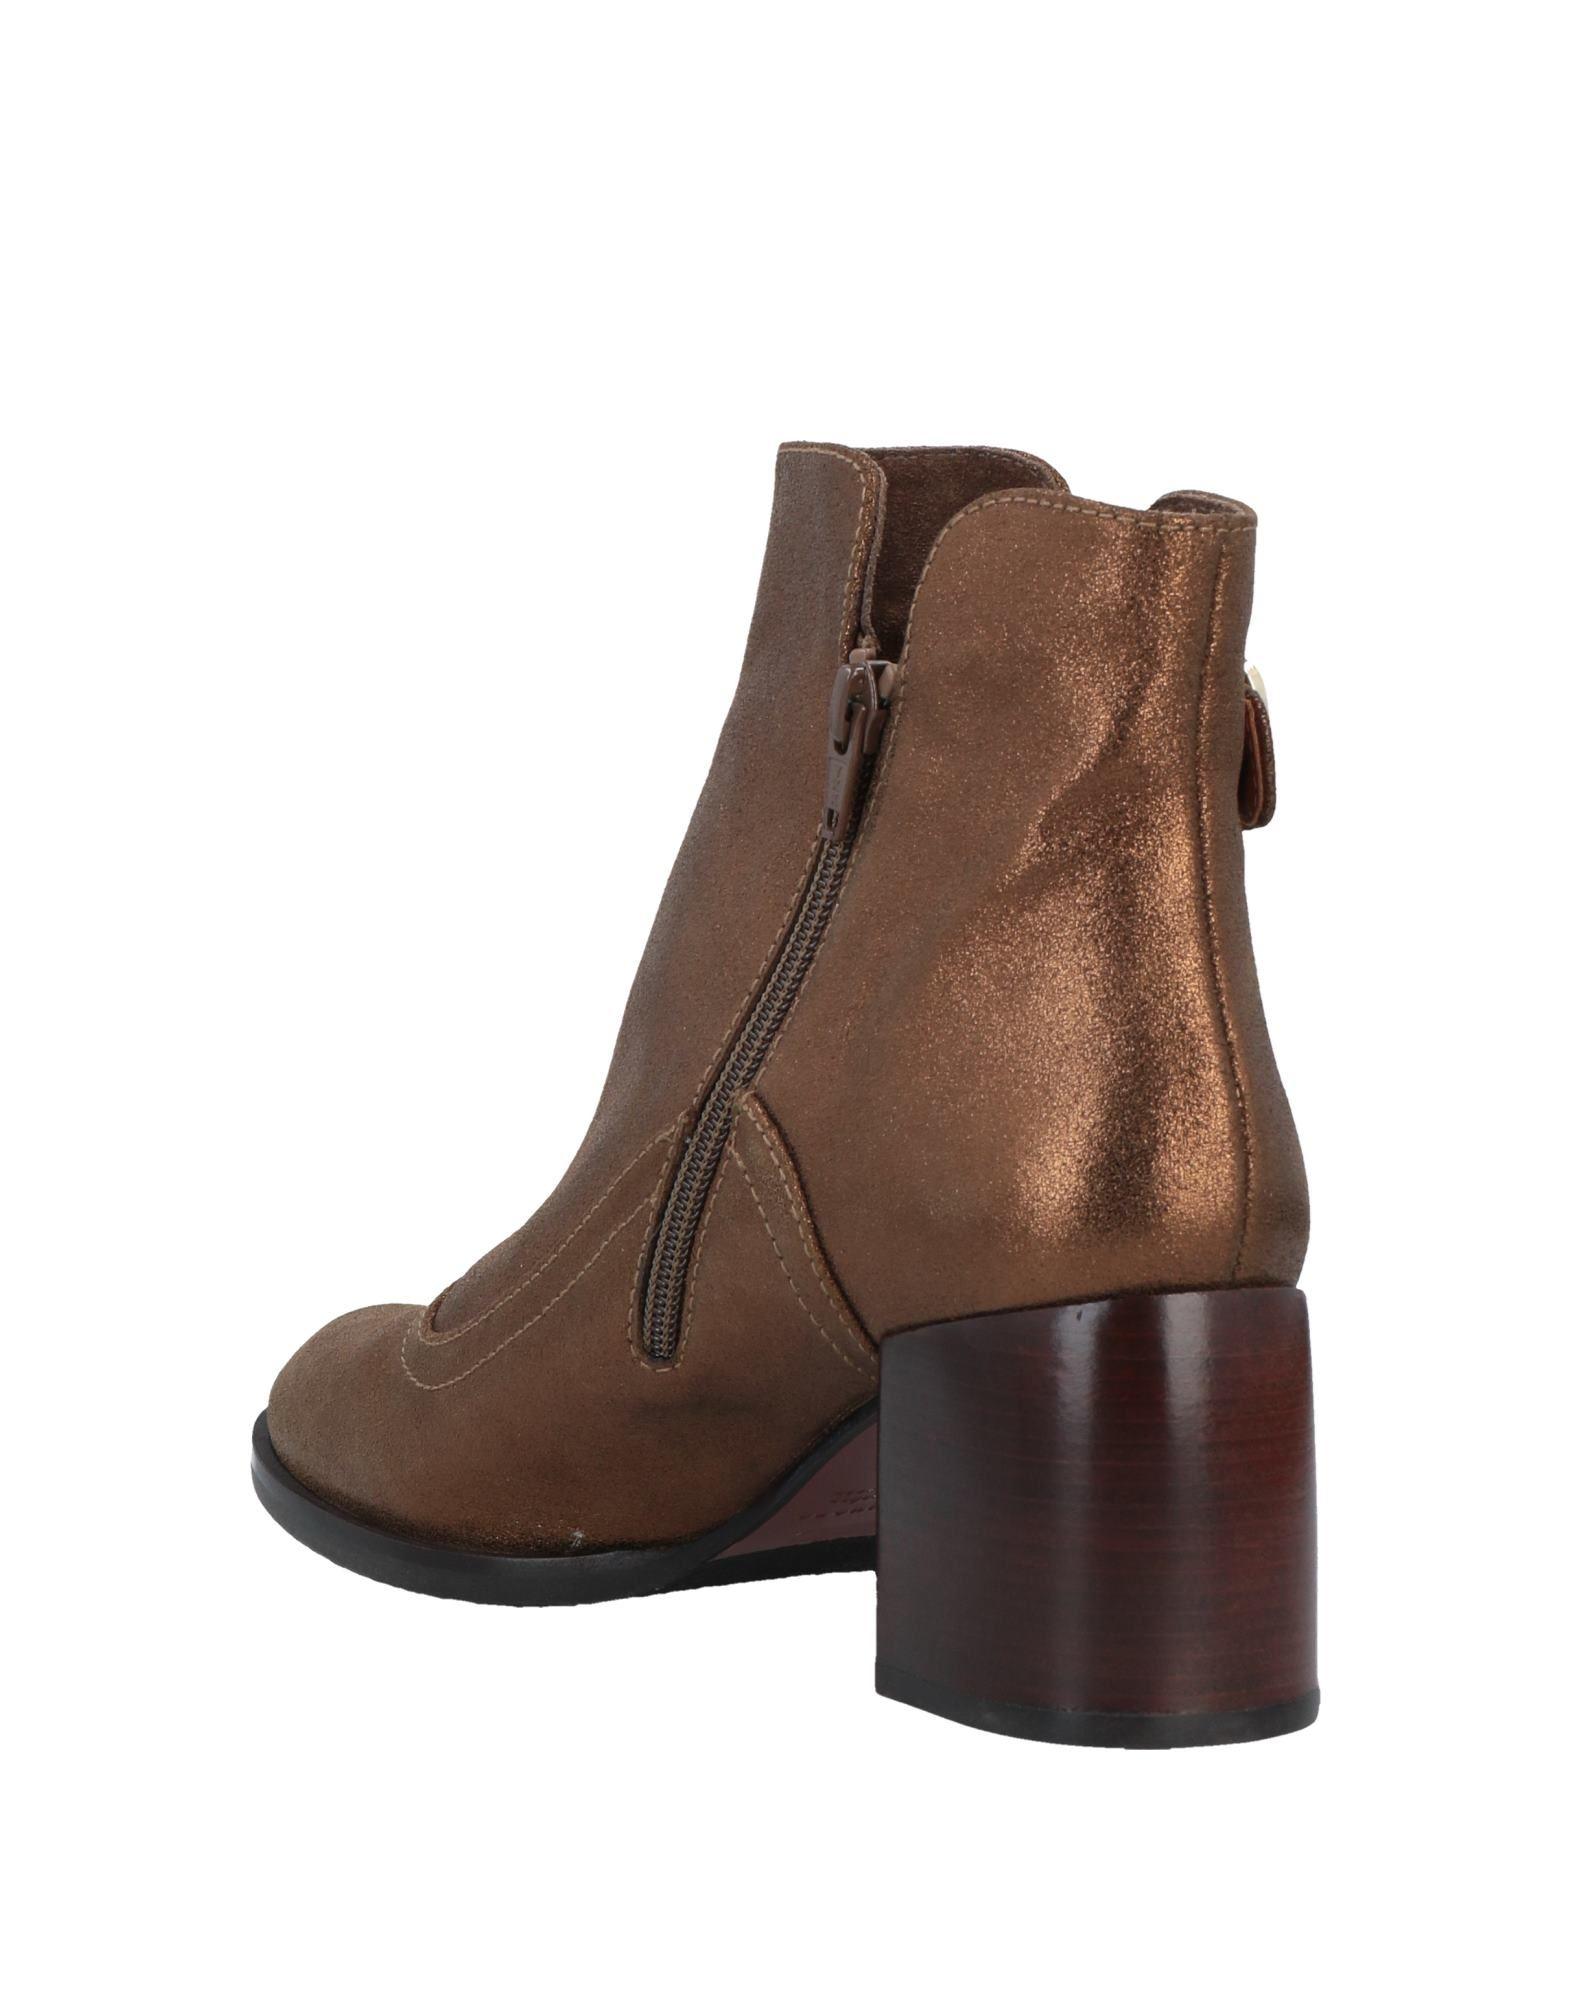 Chie Mihara Leather Ankle Boots in Bronze (Brown) | Lyst